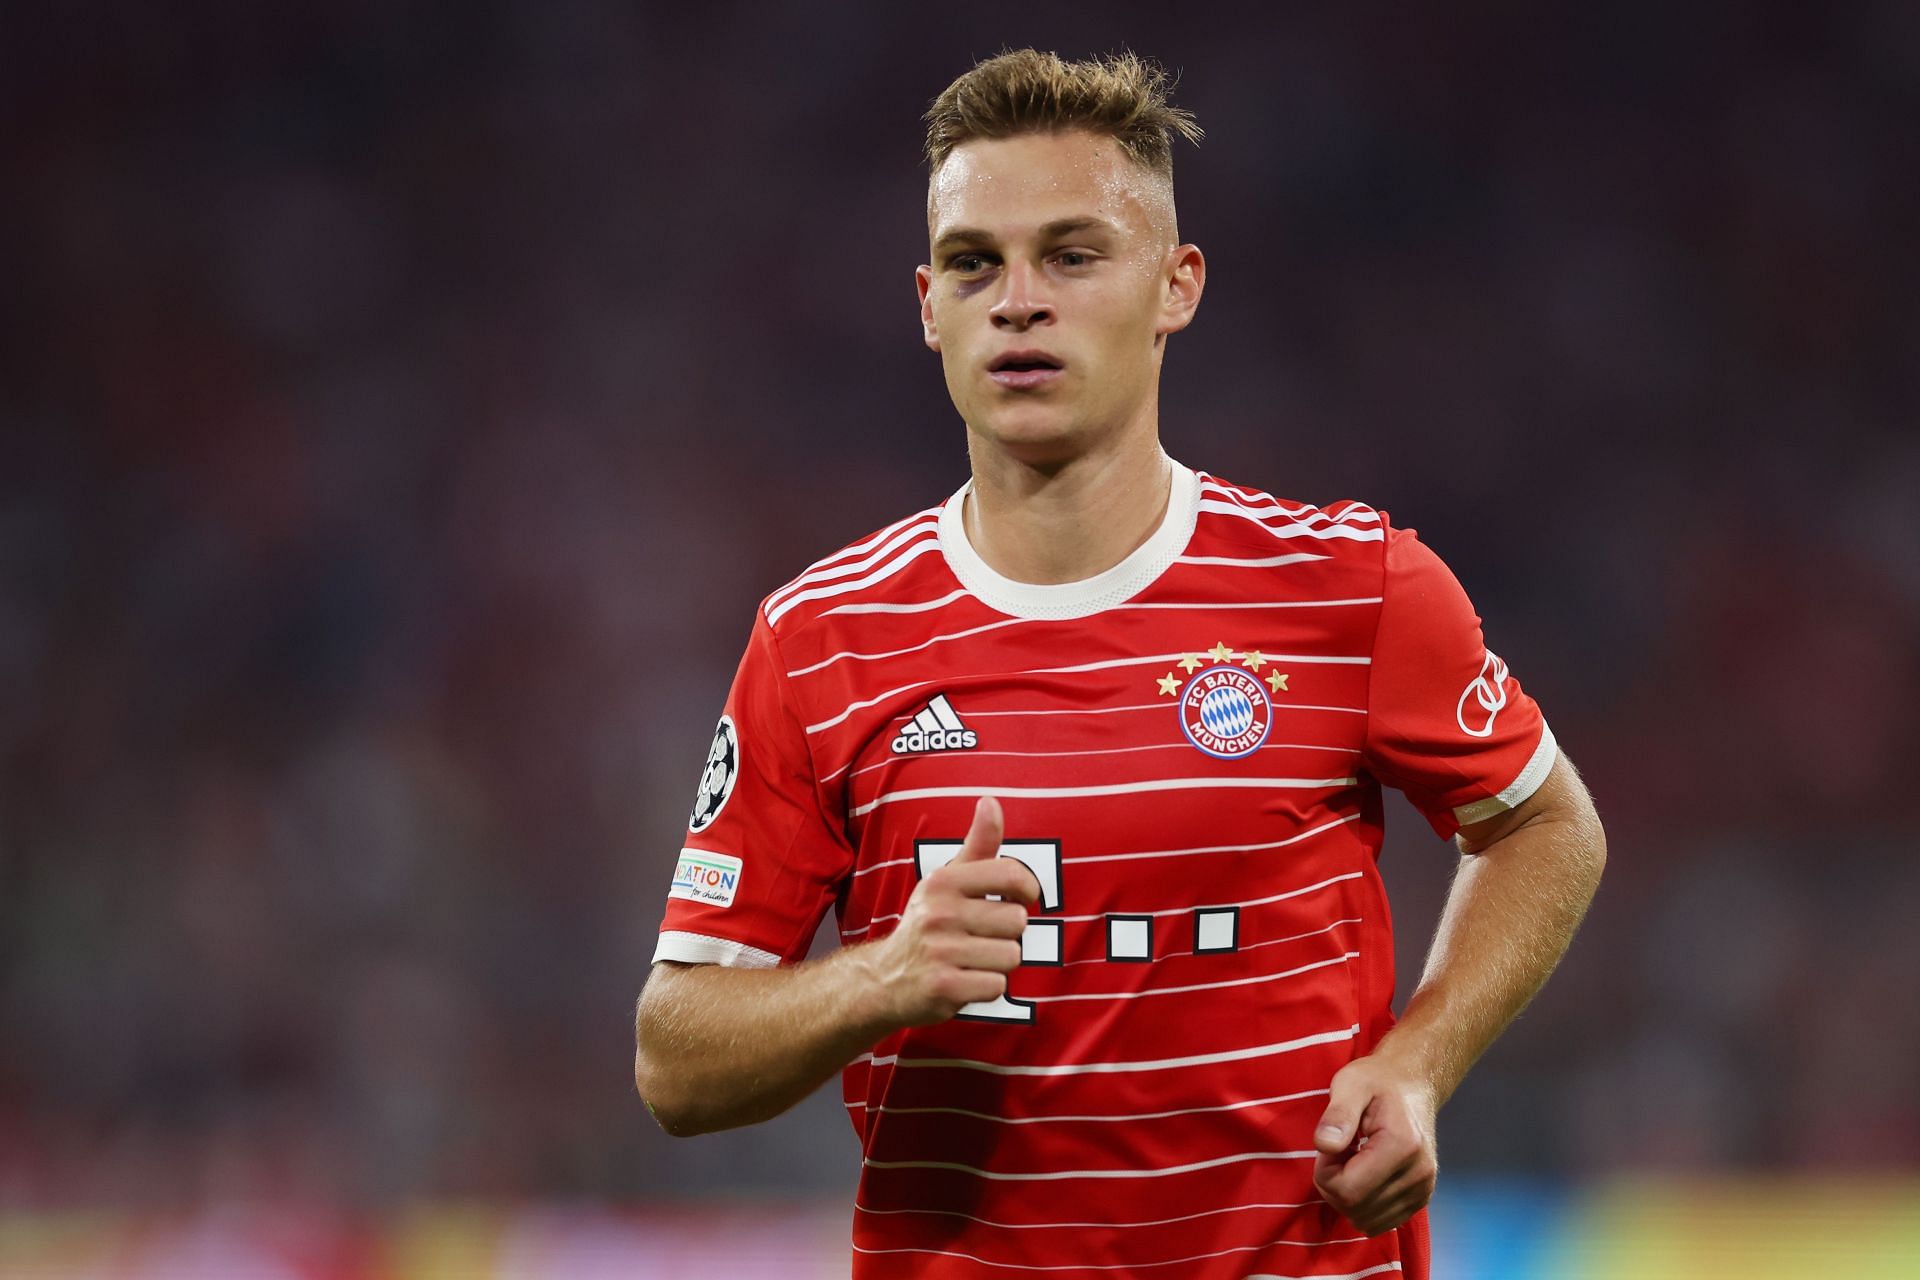 Kimmich is a key player for Bayern Munich